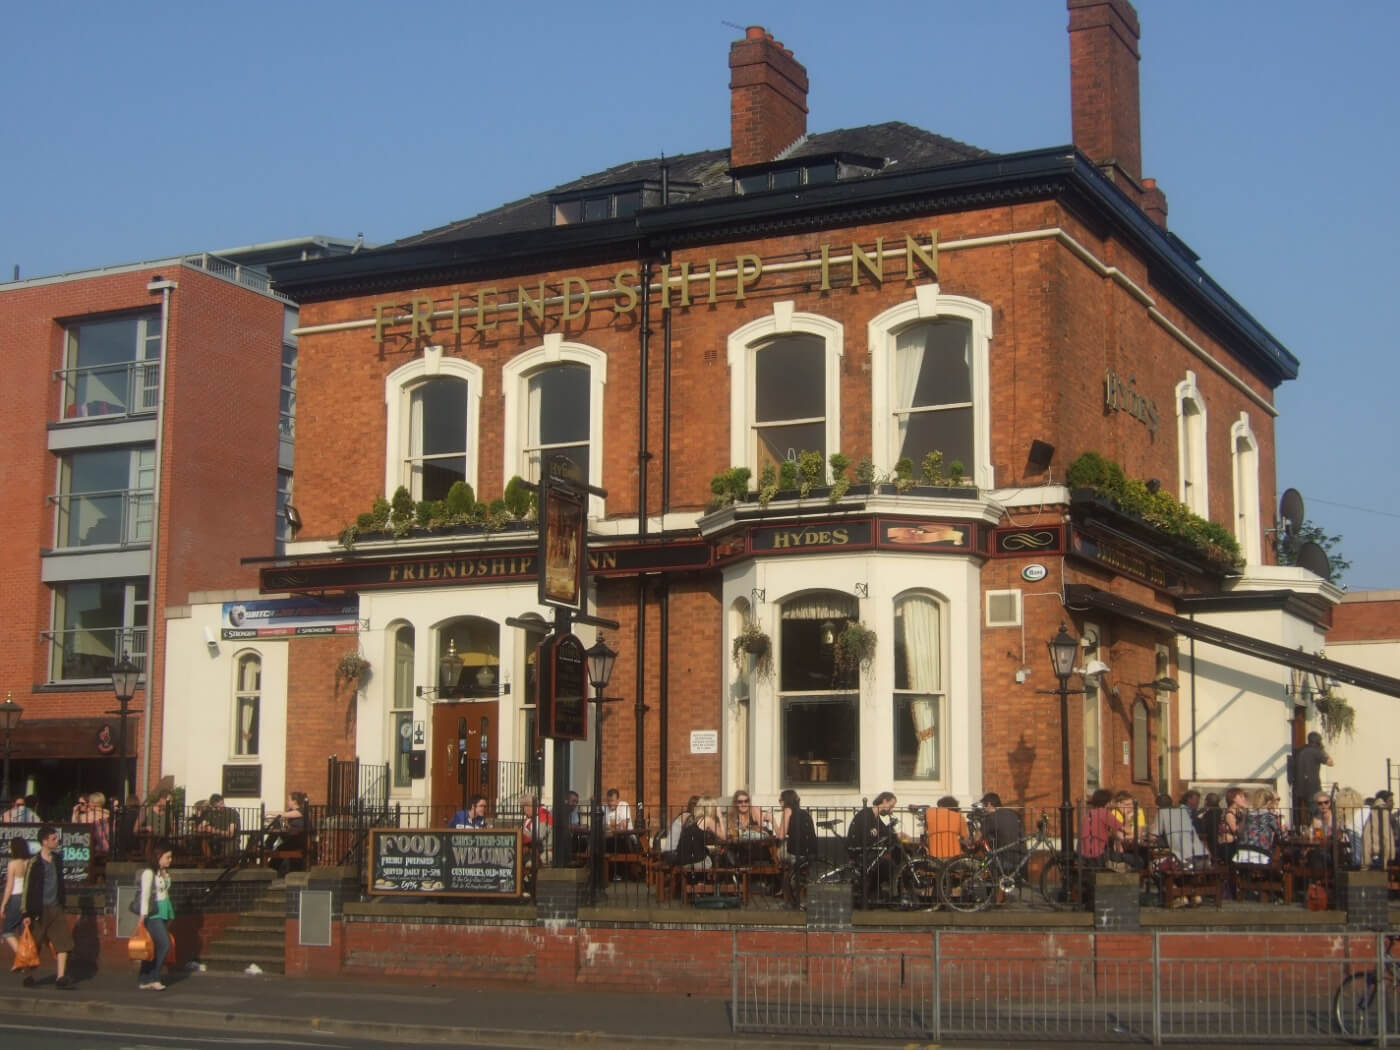 Student Accommodation in Fallowfield, Manchester - The Friendship Inn on a sunny day